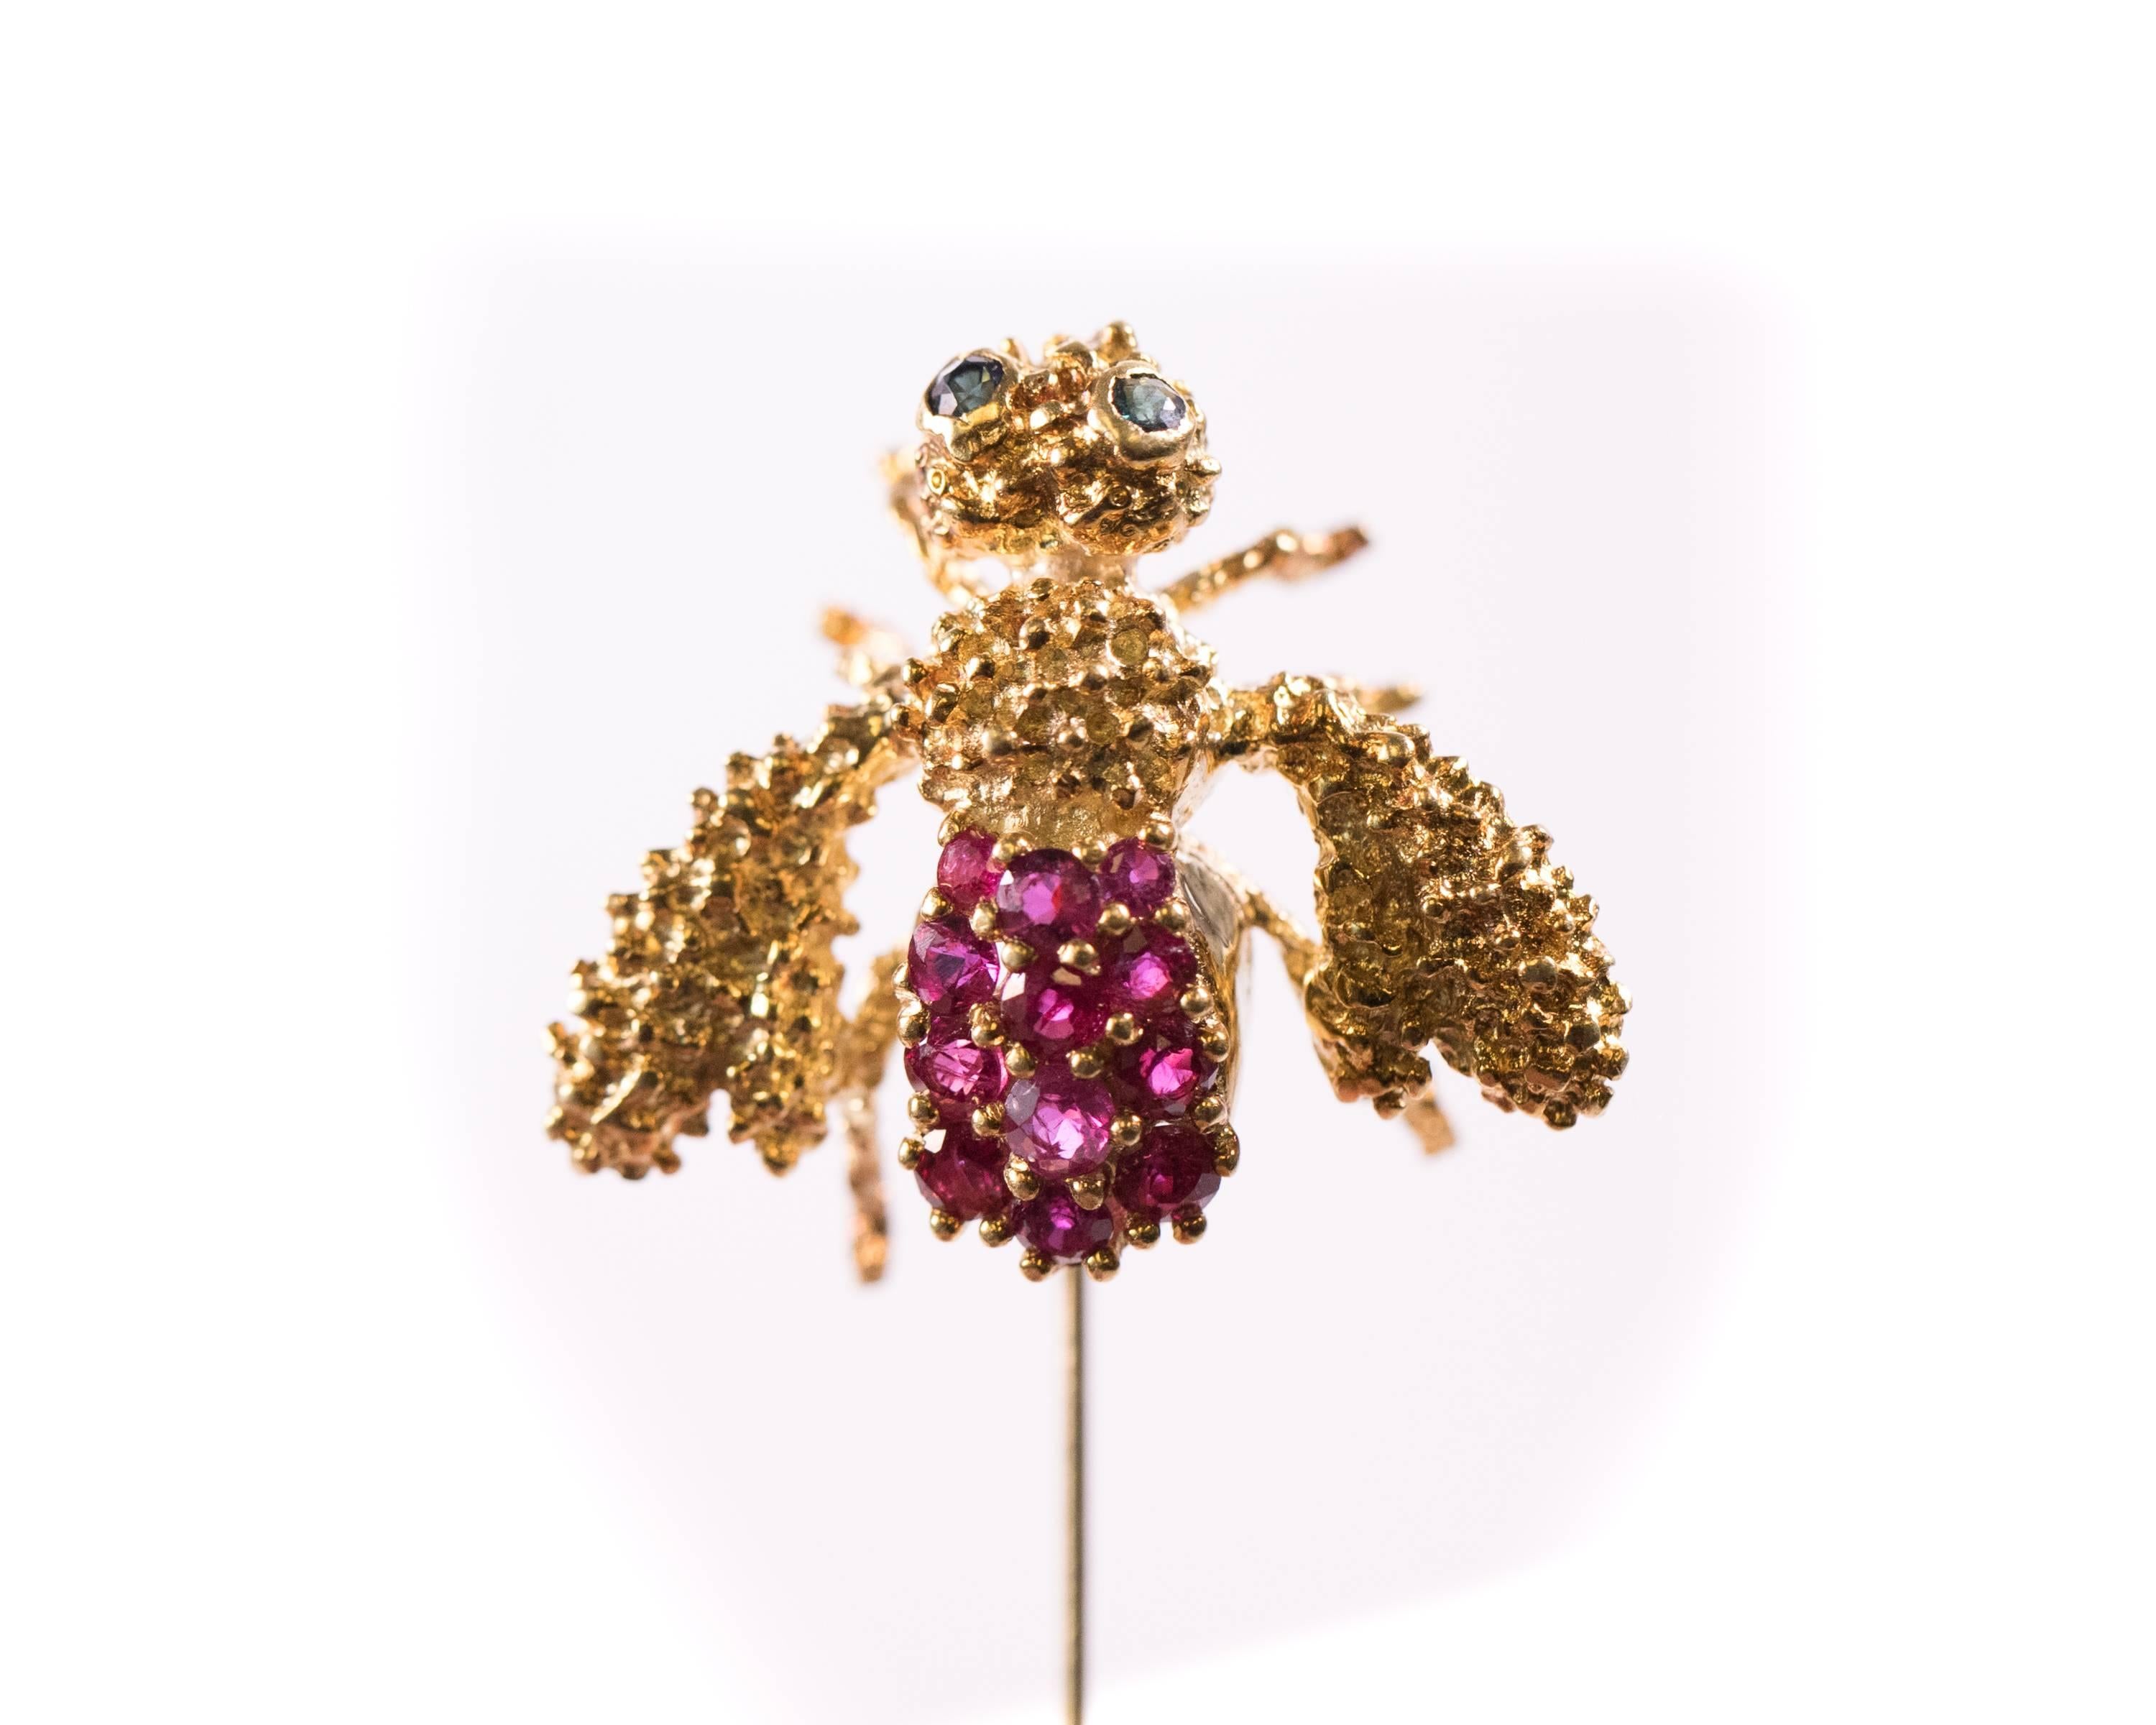 This vintage 1980s Ruby and Sapphire Bee Stick Pin is crafted from 18 karat Yellow Gold. It features 2 Blue Sapphire Eyes and a Ruby abdomen. The gold is heavily textured on the head, thorax, wings and legs. The gold underside of the bee is smooth.